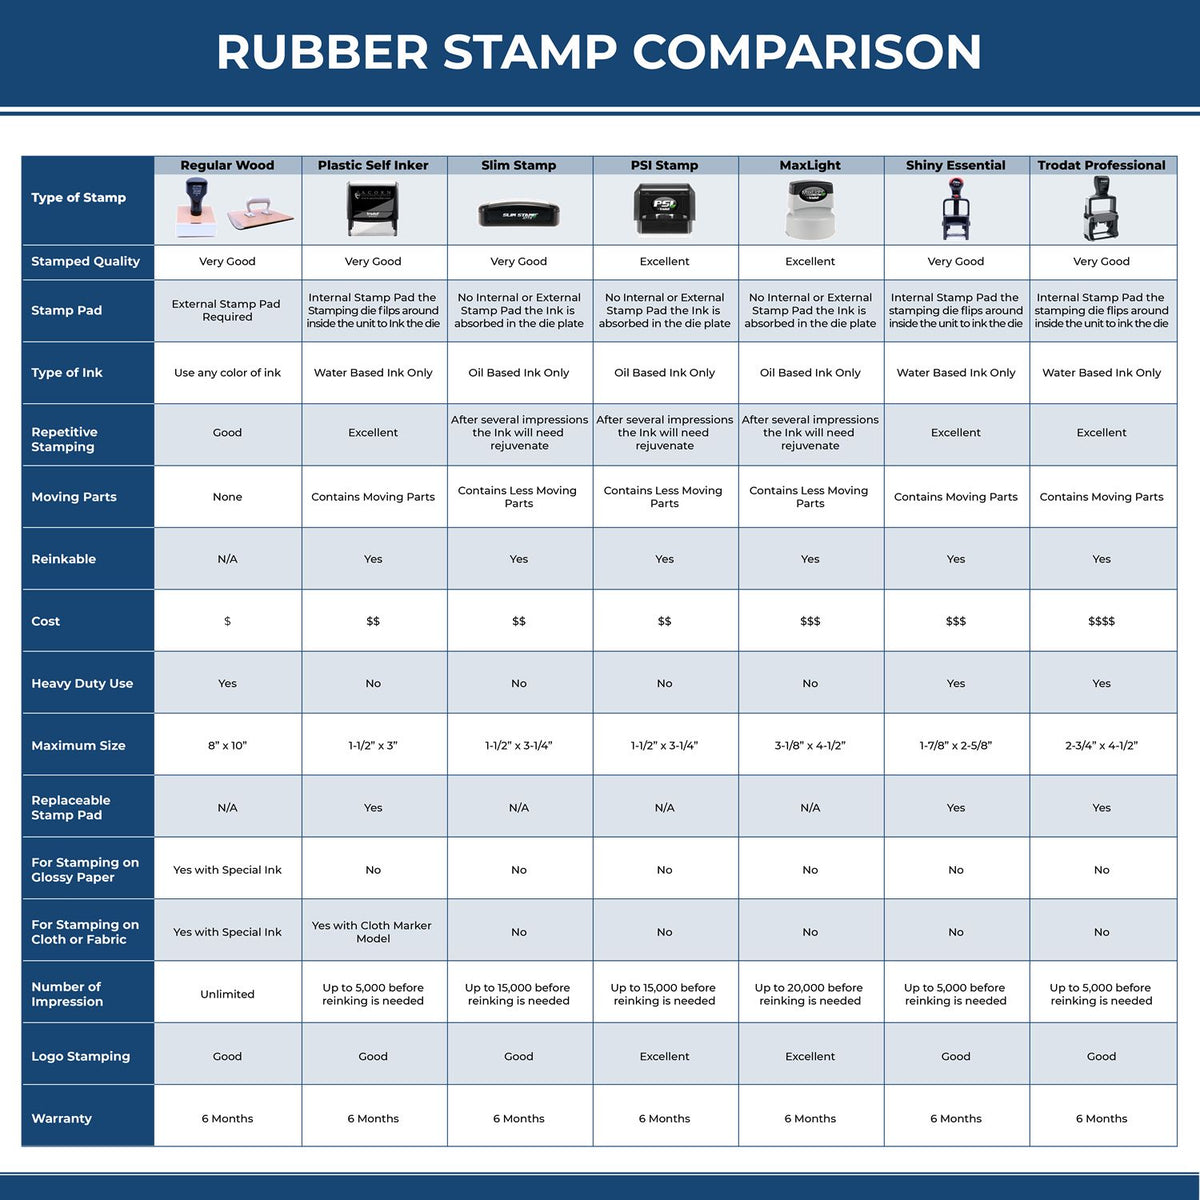 Paid with Date Line Rubber Stamp 4197R Rubber Stamp Comparison